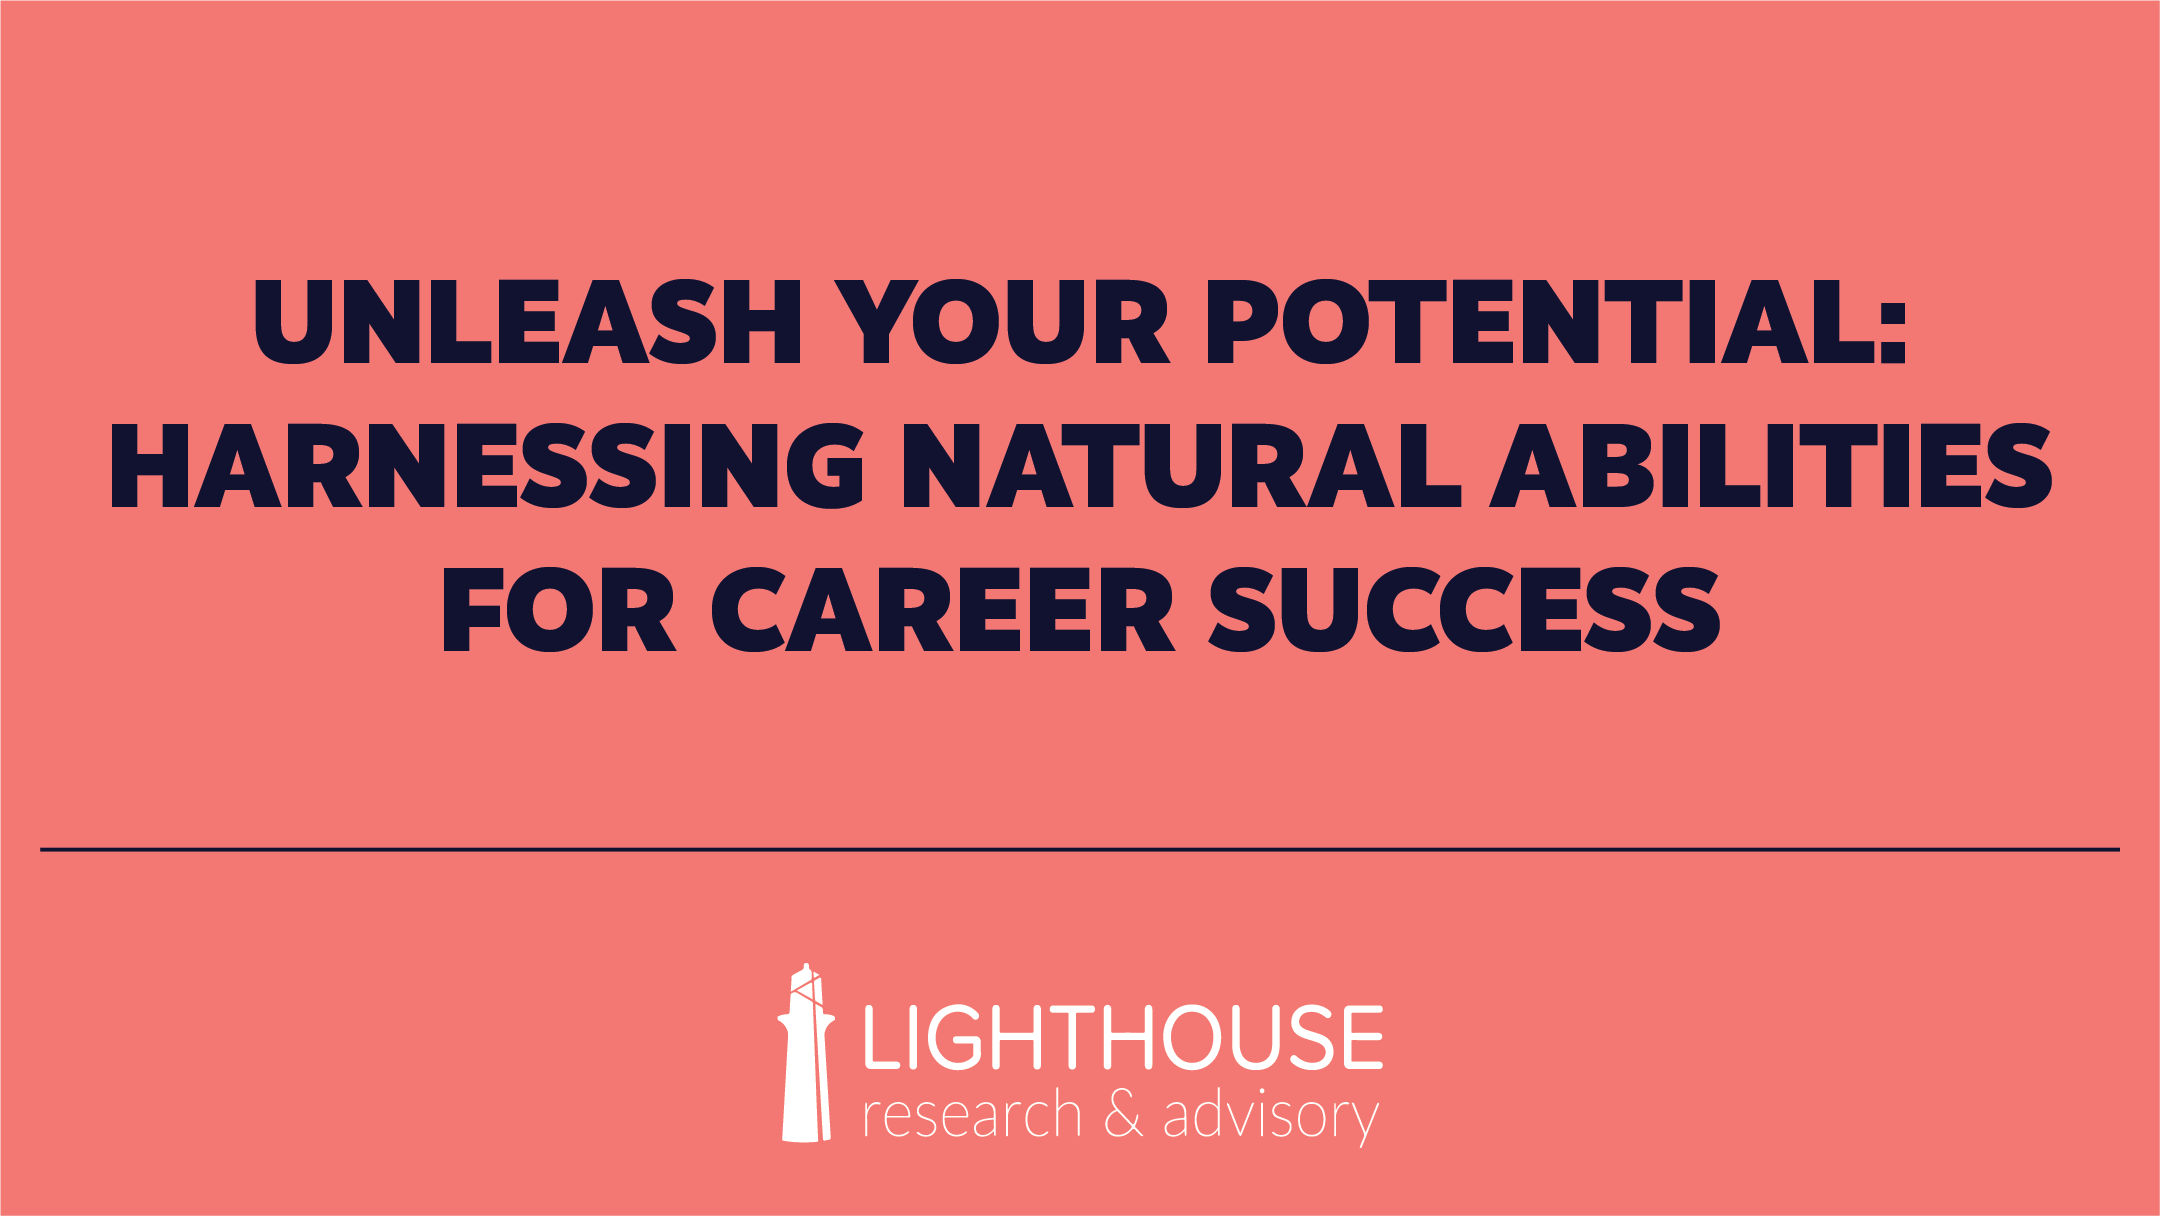 Unleash Your Potential: Harassing Natural Abilities for Career Success